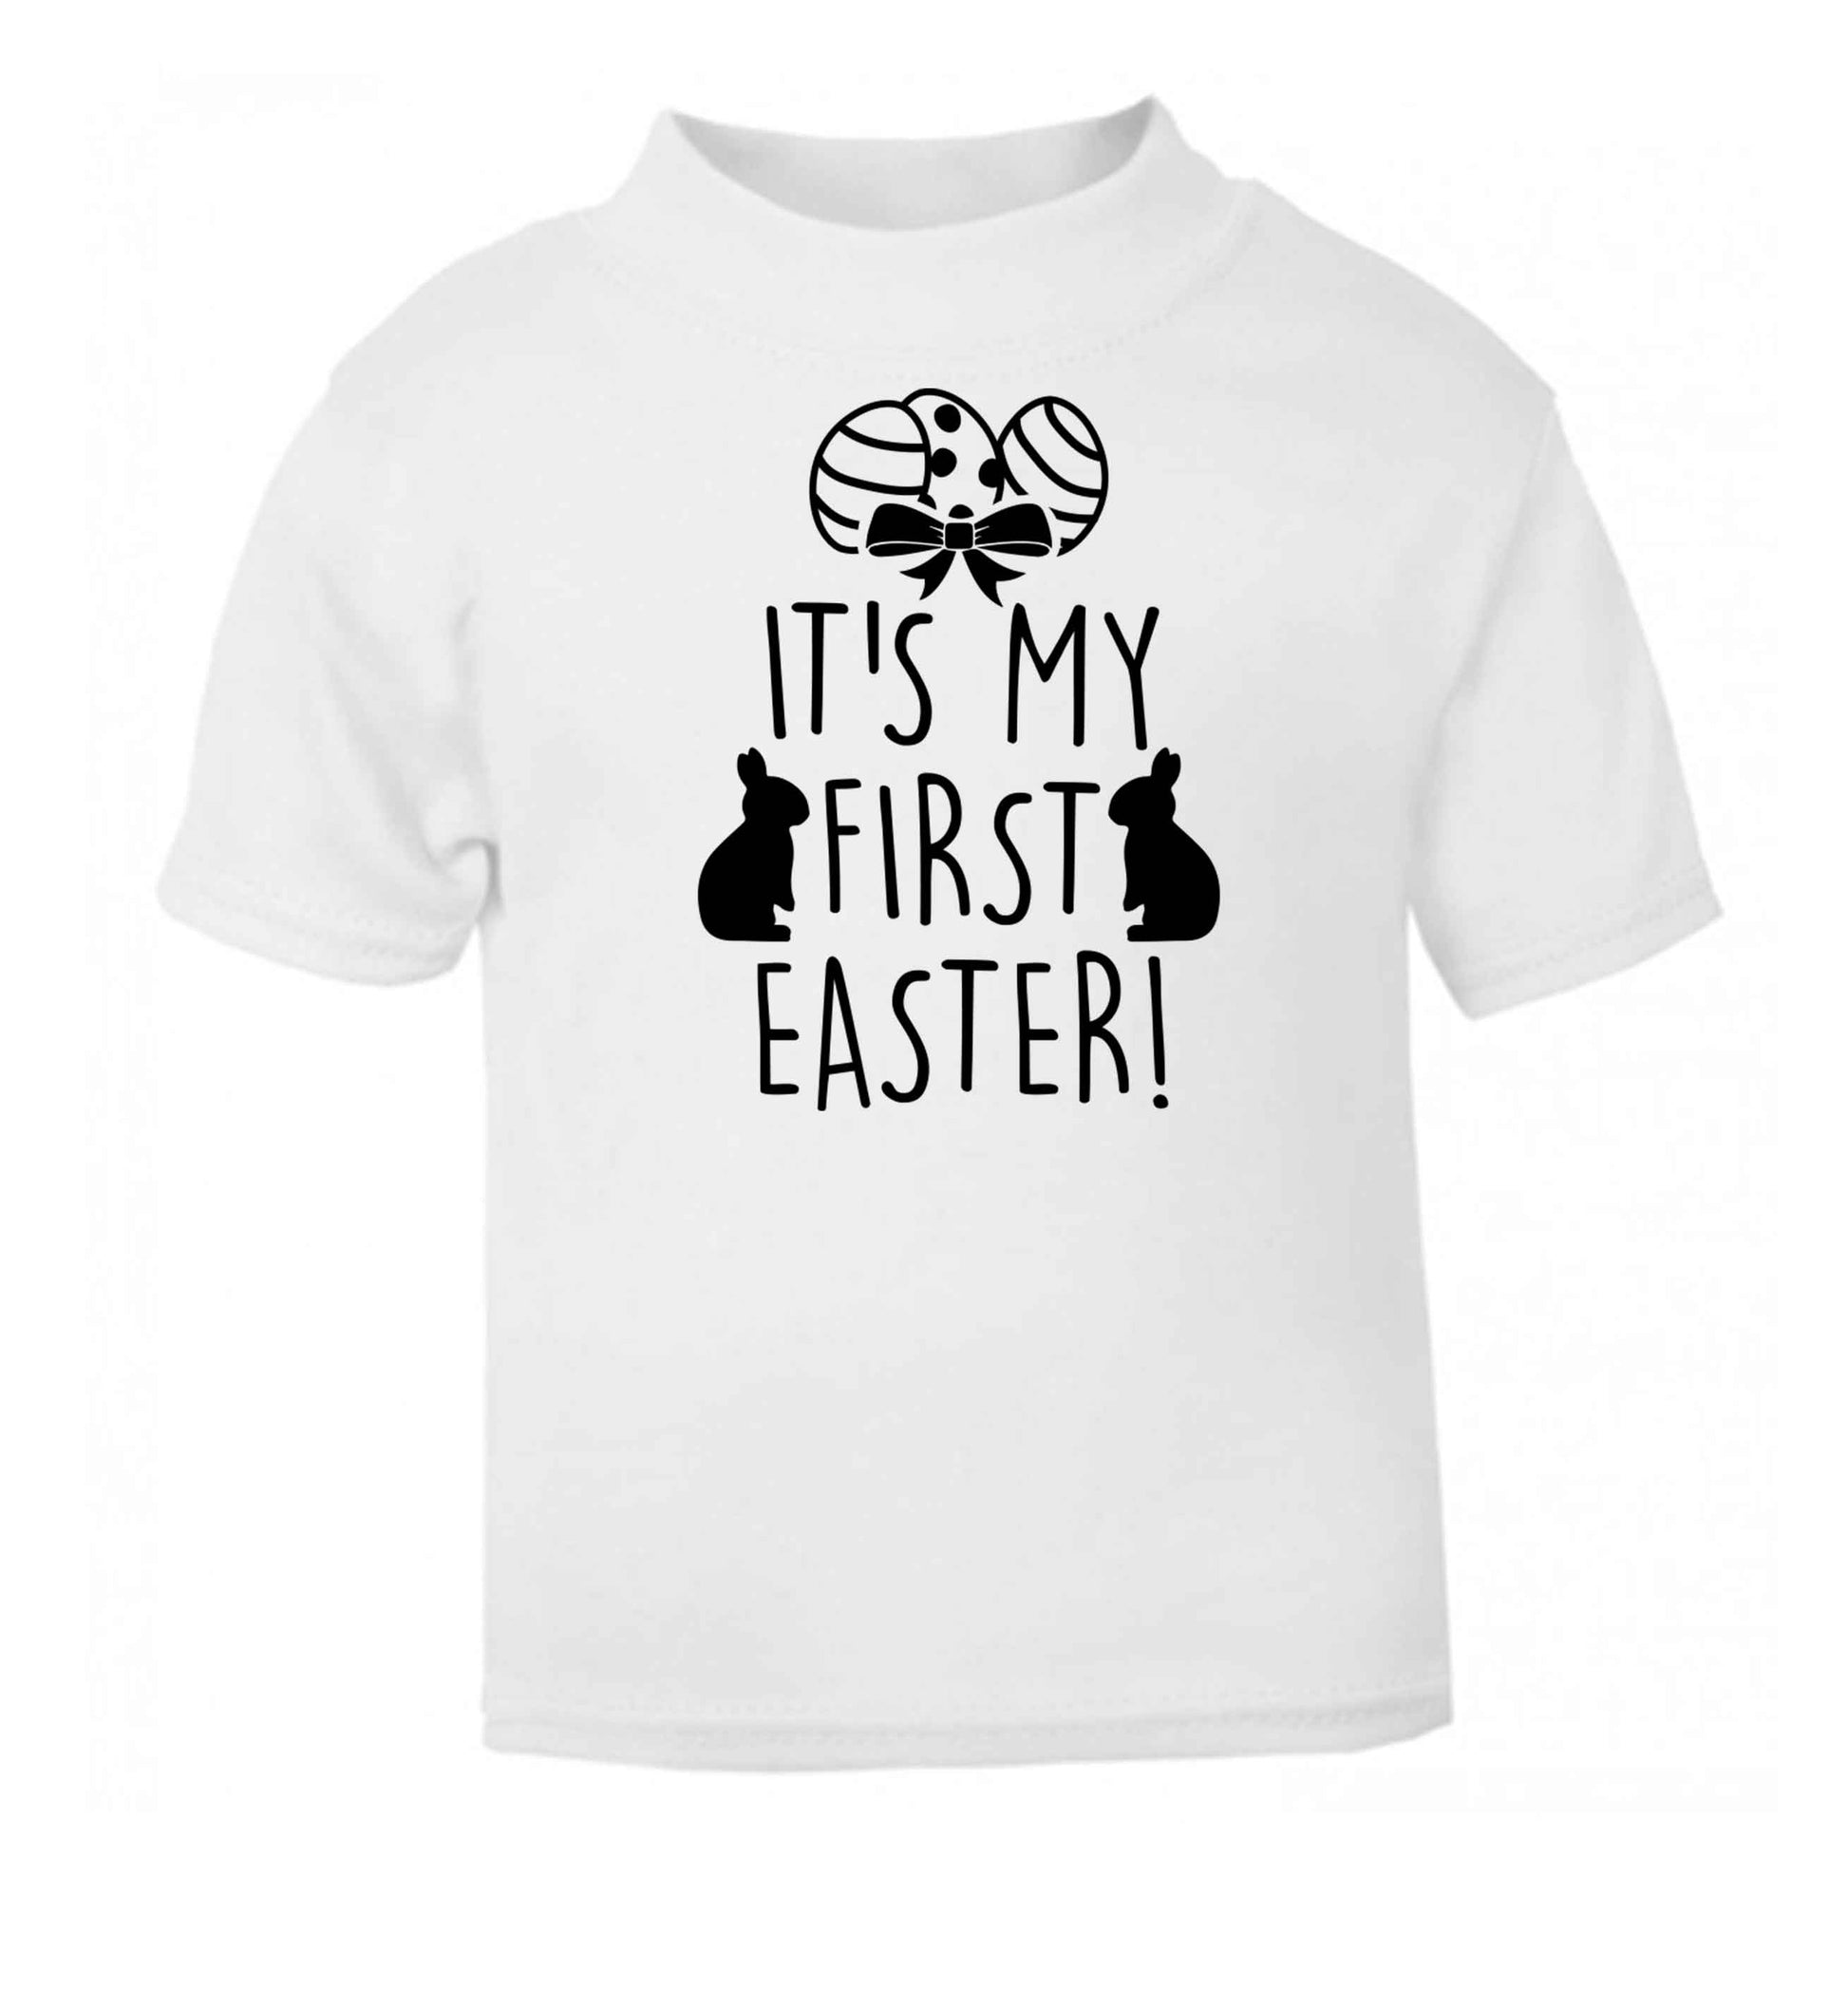 It's my first Easter white baby toddler Tshirt 2 Years